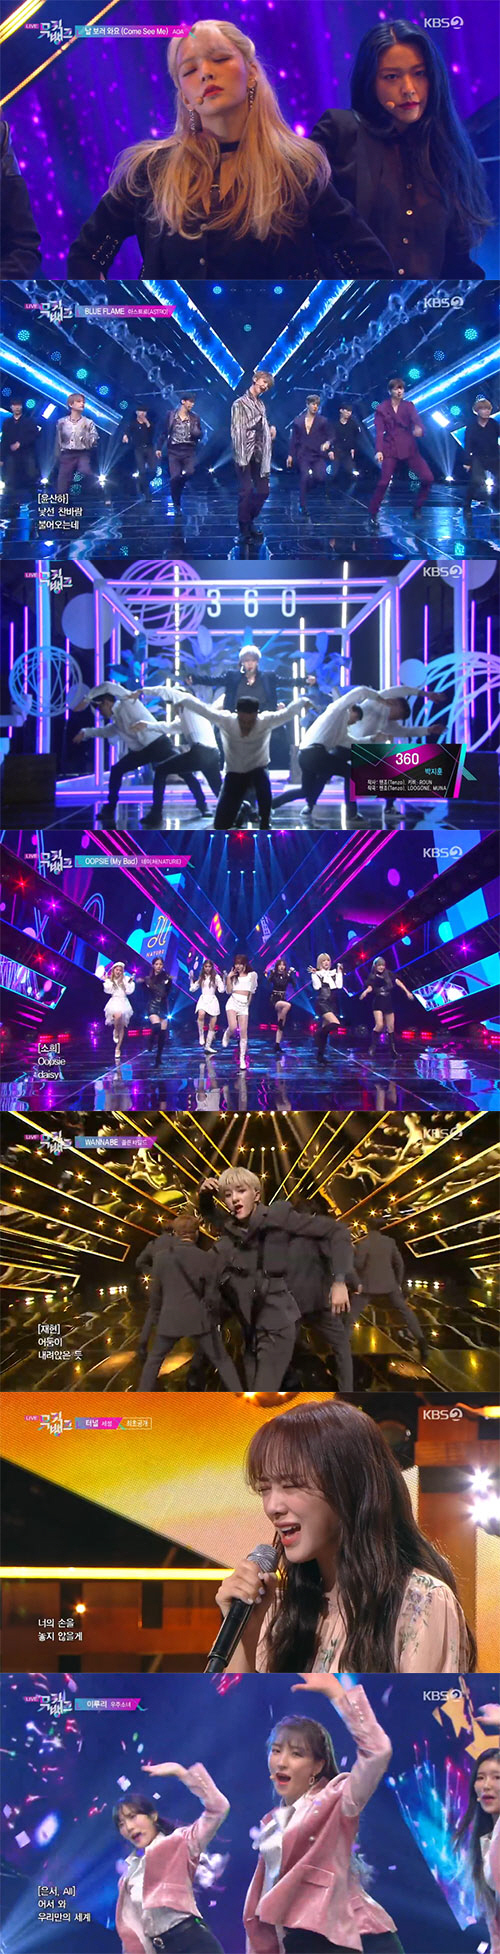 The group EXO took first place at the same time as the comeback.In KBS 2TV Music Bank broadcast on the 6th, EXO and IU won the first prize in the top prize, while Obsession and Blueming respectively.EXOs Obsession, the No. 1 candidate song, is an addicted hip-hop dance song expressing the willingness to escape from the darkness of the terrible obsession toward oneself. Performance is also composed of attractive point choreography with heavy movement and delicate expressive power.Another top-notch candidate, IUs Blueming, is a unique song with a resplendent sound and a unique The Shins source blended with a dynamic band sound.On this day, several singers comeback stage continued.Sejeong set up a comeback stage with Tunnel as an emotional yet affectionate ballad song.Sejeongs warm voice called Voice Queen and careful musical instrument composition raised the perfection with a heart of comfort and a heart of comfort.Park Jihoon also showed off the comeback stage on the day.The title song 360 is a song that captures the spotlight pouring toward Park Jihoon and his confident sentiments about it.Nature (NATURE) is the second mini album [NATURE WORLD: CODE A(Nature World: Code A)] title song OOPSIE (Oopsy) is an EDM song with intense The Shins bass and an Addicted beat, which expresses Natures unique energetic energy and personality.Astro has been singing the title song Blue Flame.Blue Flame is a song that gives a groovy feeling of reggae and Mumbaton rhythm. It was joined by famous composers from home and abroad and participated in composition, and helped Astros new musical attempt.WJSN showed the stage of the title song Iruri, and Iruri is a song that represents the candid feelings of the girl who is about to confess. The chorus melody that seems to memorize dreamy vocal lines and spells is impressive.Golden Childs title song Wannabe is a song about something other than me, or I who wants to be another self inside.In addition, Make This, which shows the charisma of 1TEAM, is a song with 1TEAMs ambitious aspiration to make a burning stage without Break. IK (iK) who participated in choreography of domestic idol groups such as Gods Seven, New East and Astro choreographed the choreography of 1TEAM, completed the intense performance of 1TEAM, The choreographer Fireworks Dance and Full Metal Jacket Dance, which flutters or sweeps the Full Metal Jacket, have been added to the choreography, further doubling the charm of the song.JxR released Eliment for the first time: Eliment is a song about the authenticity of two men who love a woman; written by two members.The Shins sound is a trendy future pop genre with an accentuated hook, a backbone intense voice and a glass bass voice.AOA also showed the stage of Goodbye on the day. Come to see me is a dance song with intense beat and Suh Jung guitar sound.The dreamy tone of AOA members doubles the Suh Jung atmosphere.On the other hand, Music Bank will include 1TEAM, AOA, BVNDIT (Vandit), CIX, EXO, JxR, OnlyOneOf, Steady, Golden Child, Nature (NATURE), New Kid, Limitless, Park Junho (PULIK), Park Jihoon, Sejeong, Steady Wit Sorrow, Astro (ASTRO), Oli (ORLY), WJSN, and Lee Jun-young appeared and set up a spectacular stage.